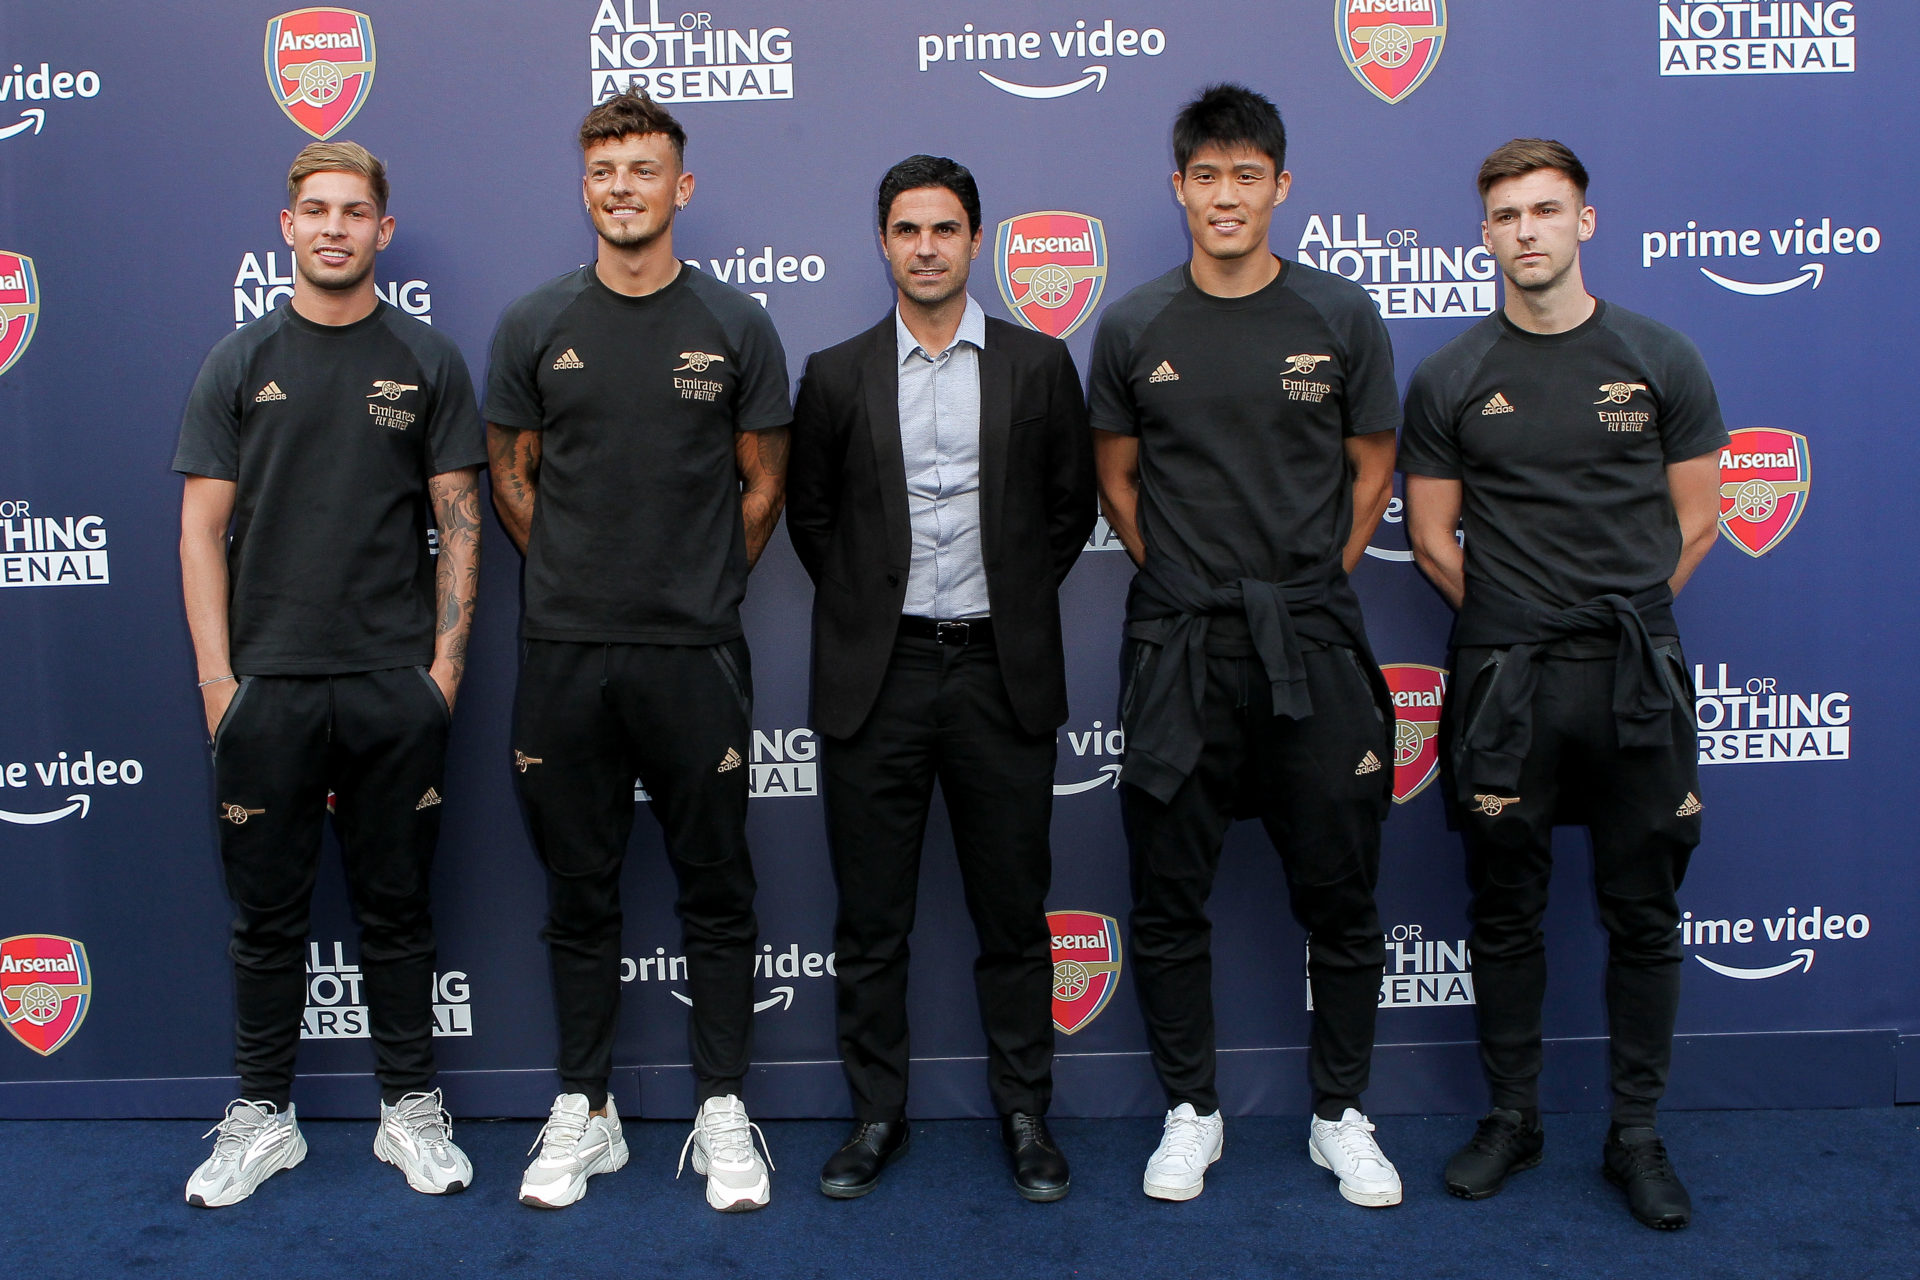 "All or Nothing: Arsenal" - Global Premiere - VIP Arrivals